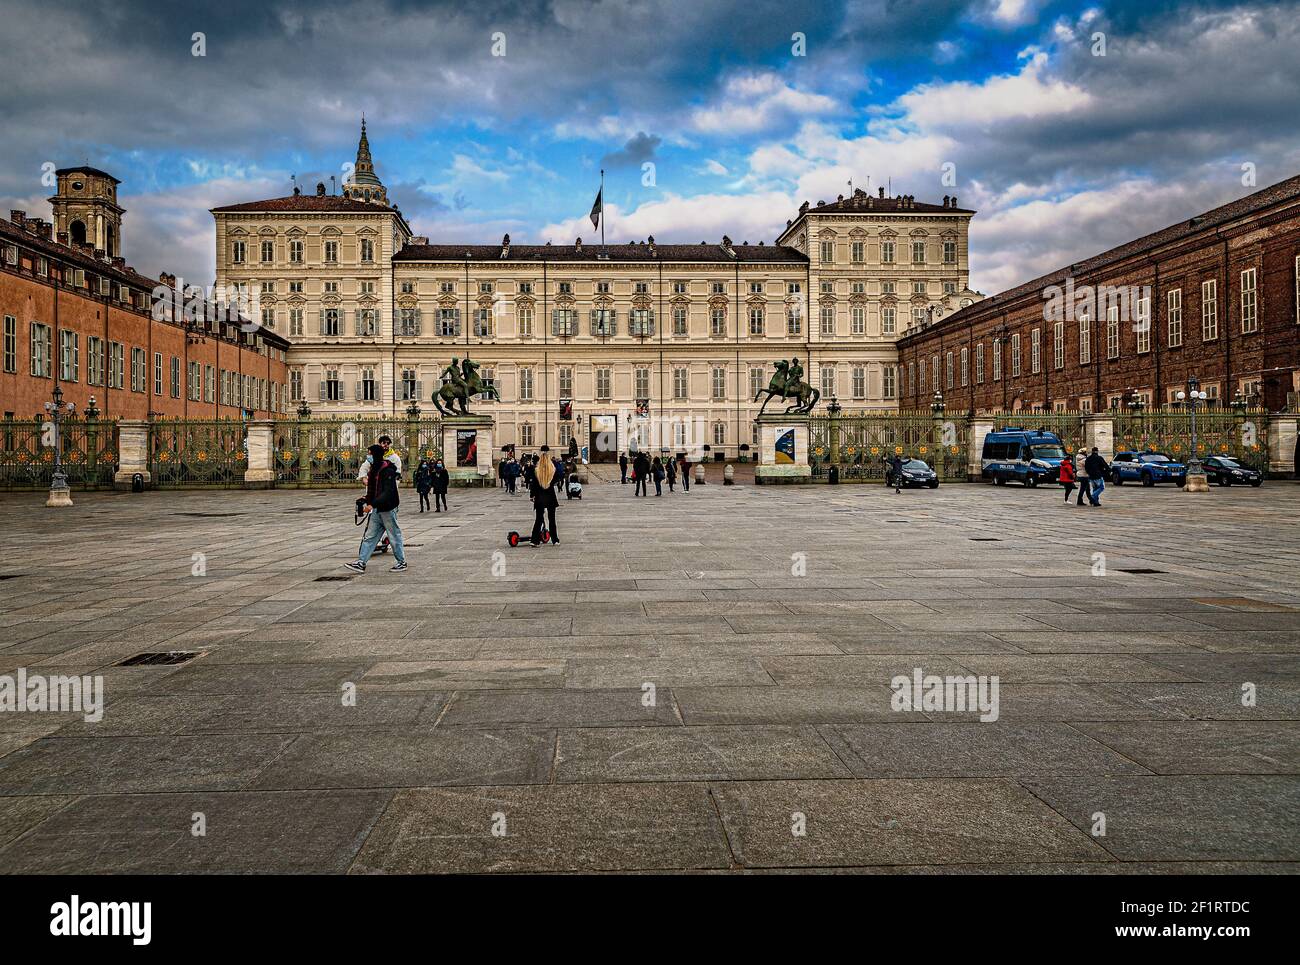 Italy Piedmont Turin - Piazza Castello - The Royal palace during Pandemic Stock Photo